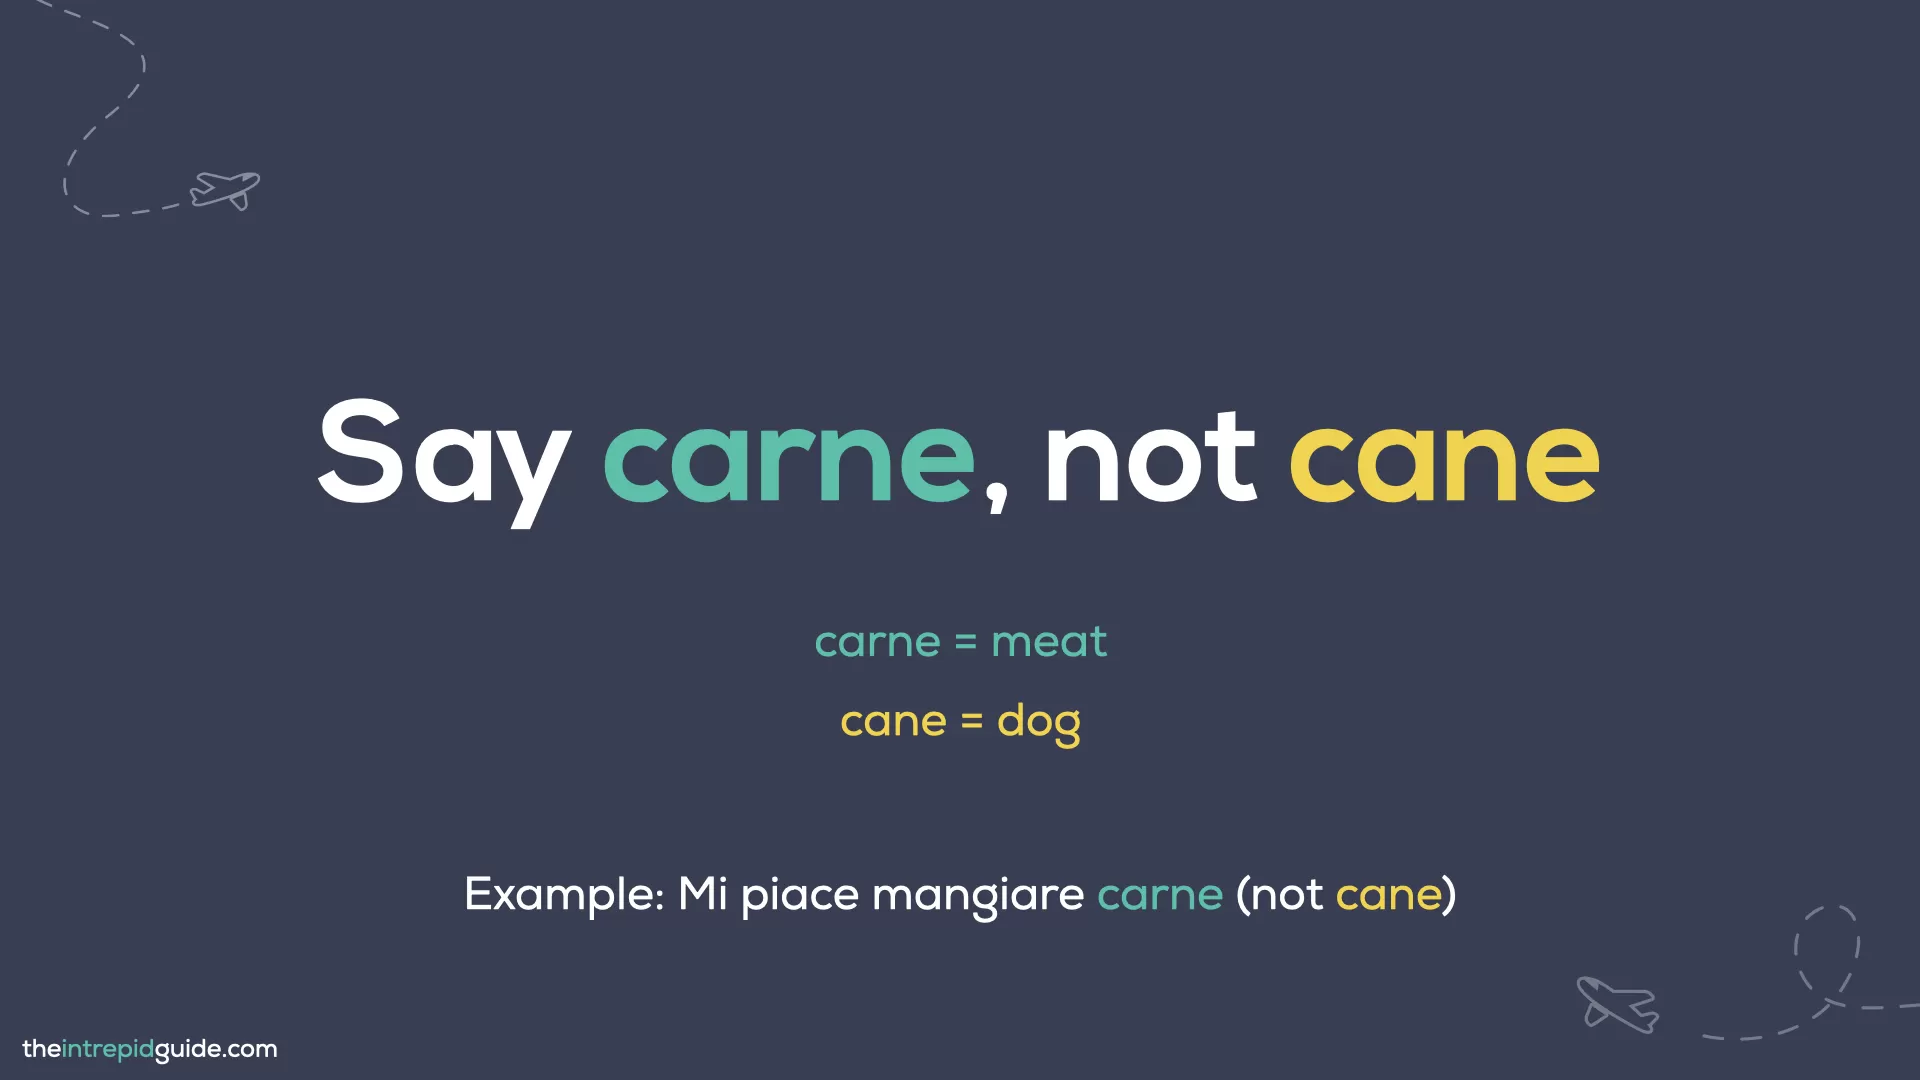 Italian Words You Should Never Mispronounce - Say carne not cane